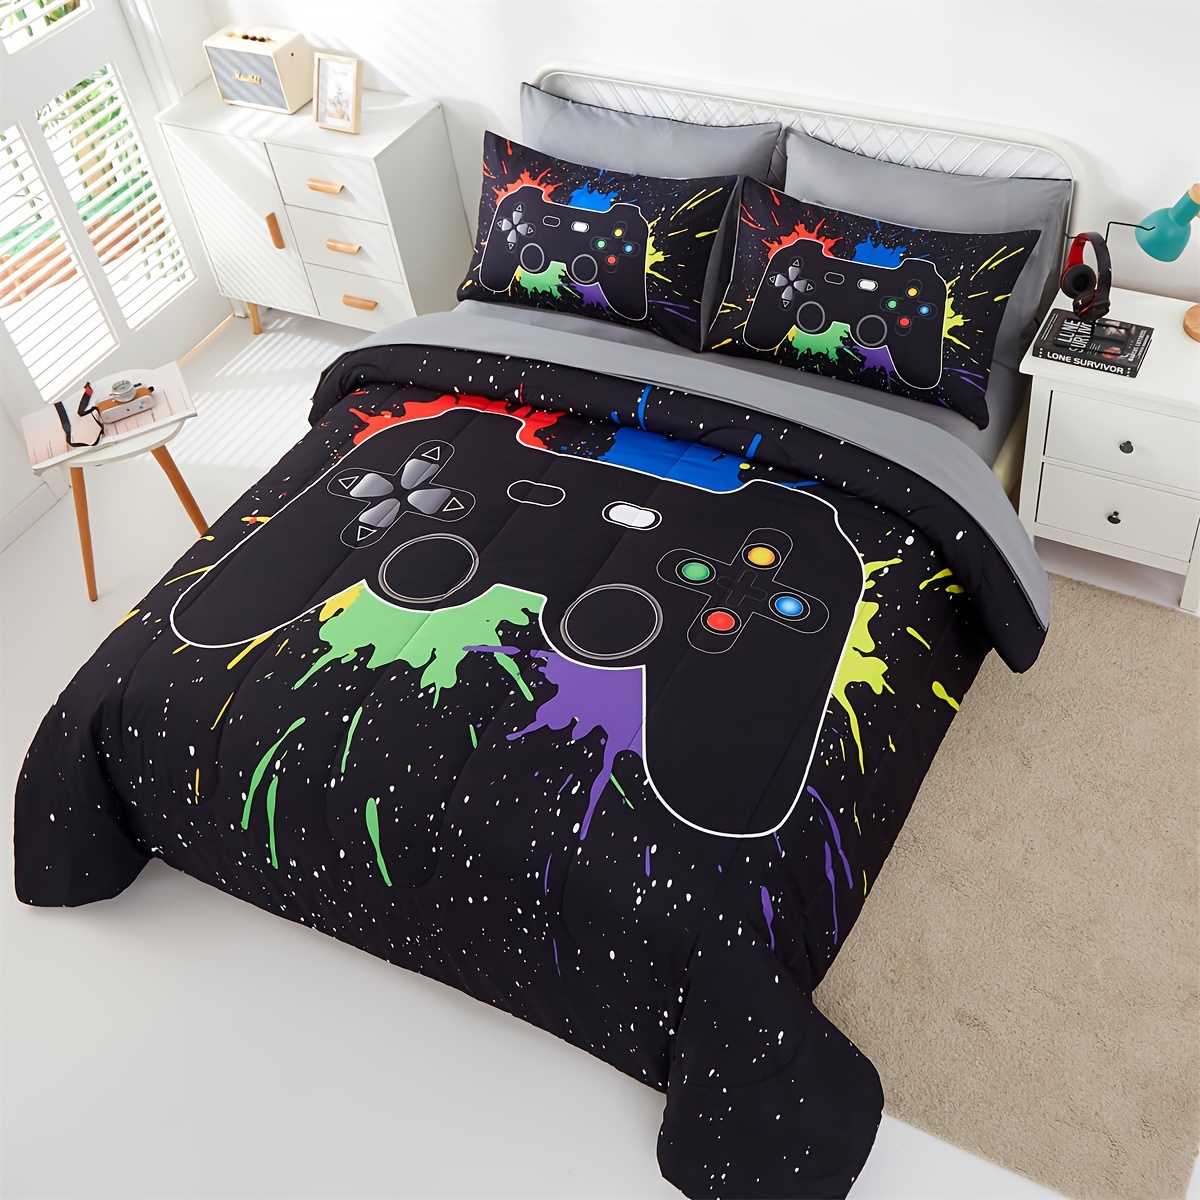 

4/5pcs Gamepad Pattern Comforter Set (1*comforter + 1*flat Sheet + 1*fitted Sheet + 1/2*pillowcase Without Filler), For All Seasons, Breathable Soft And Comfortable Bedding Set For Bedroom Room Decor